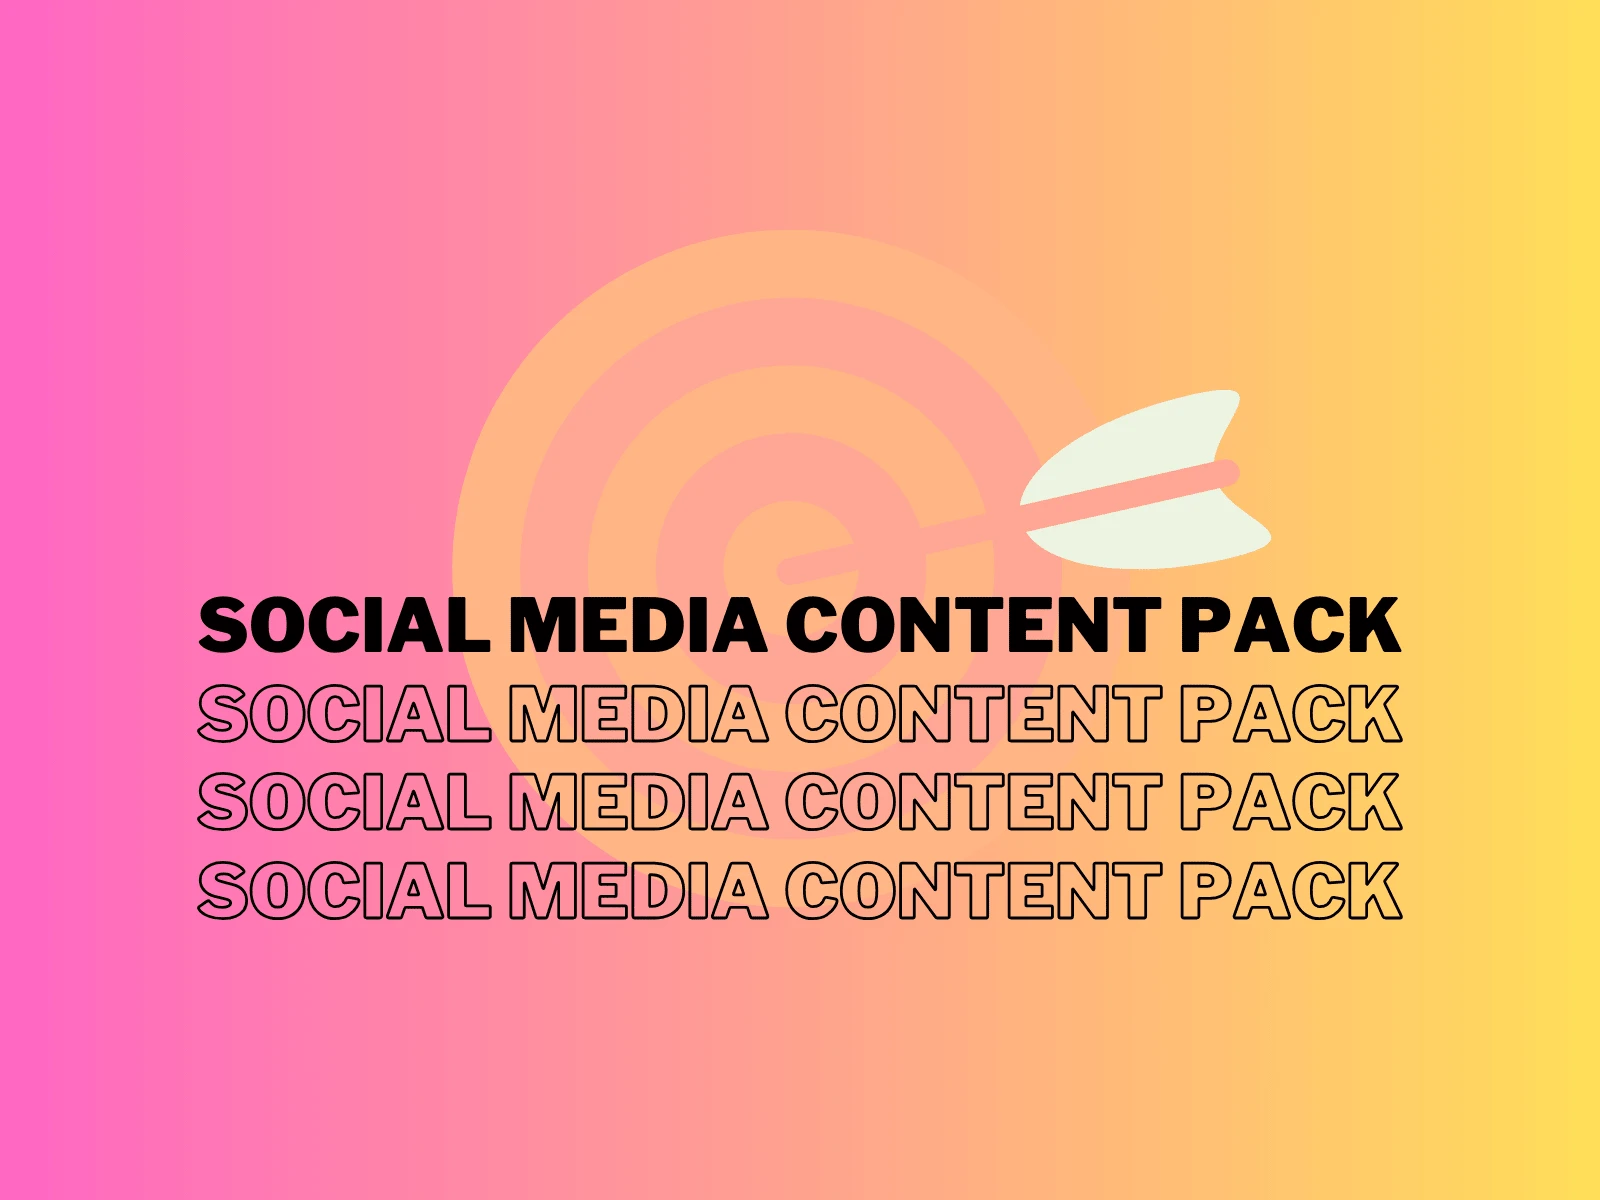 Just Post-it! Social Media content pack, a service by Sarah Dozza